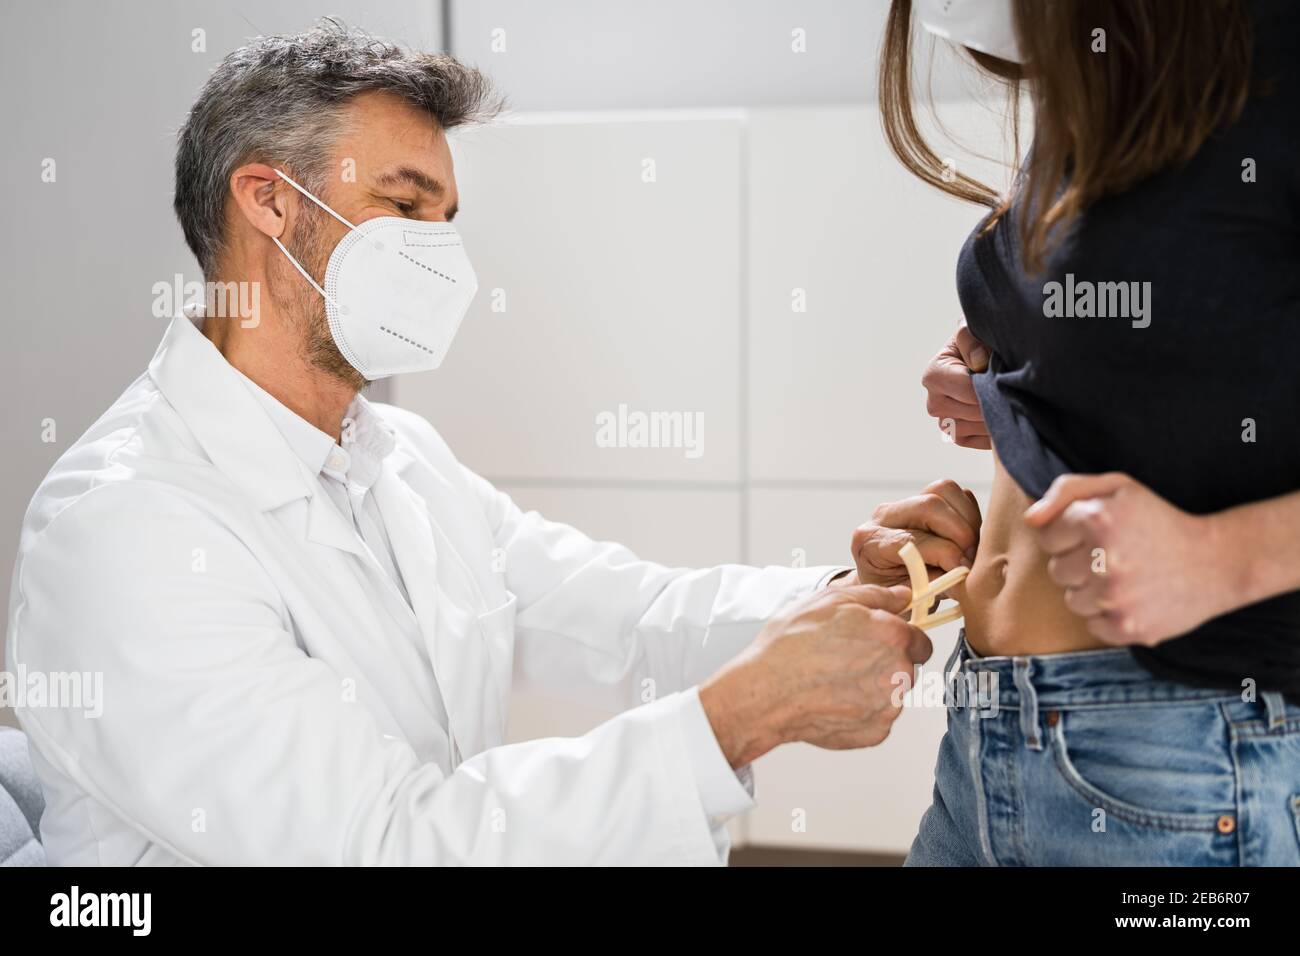 Man is Measuring His Body Fat with Calipers. Stock Photo - Image of  exercise, holding: 69566936